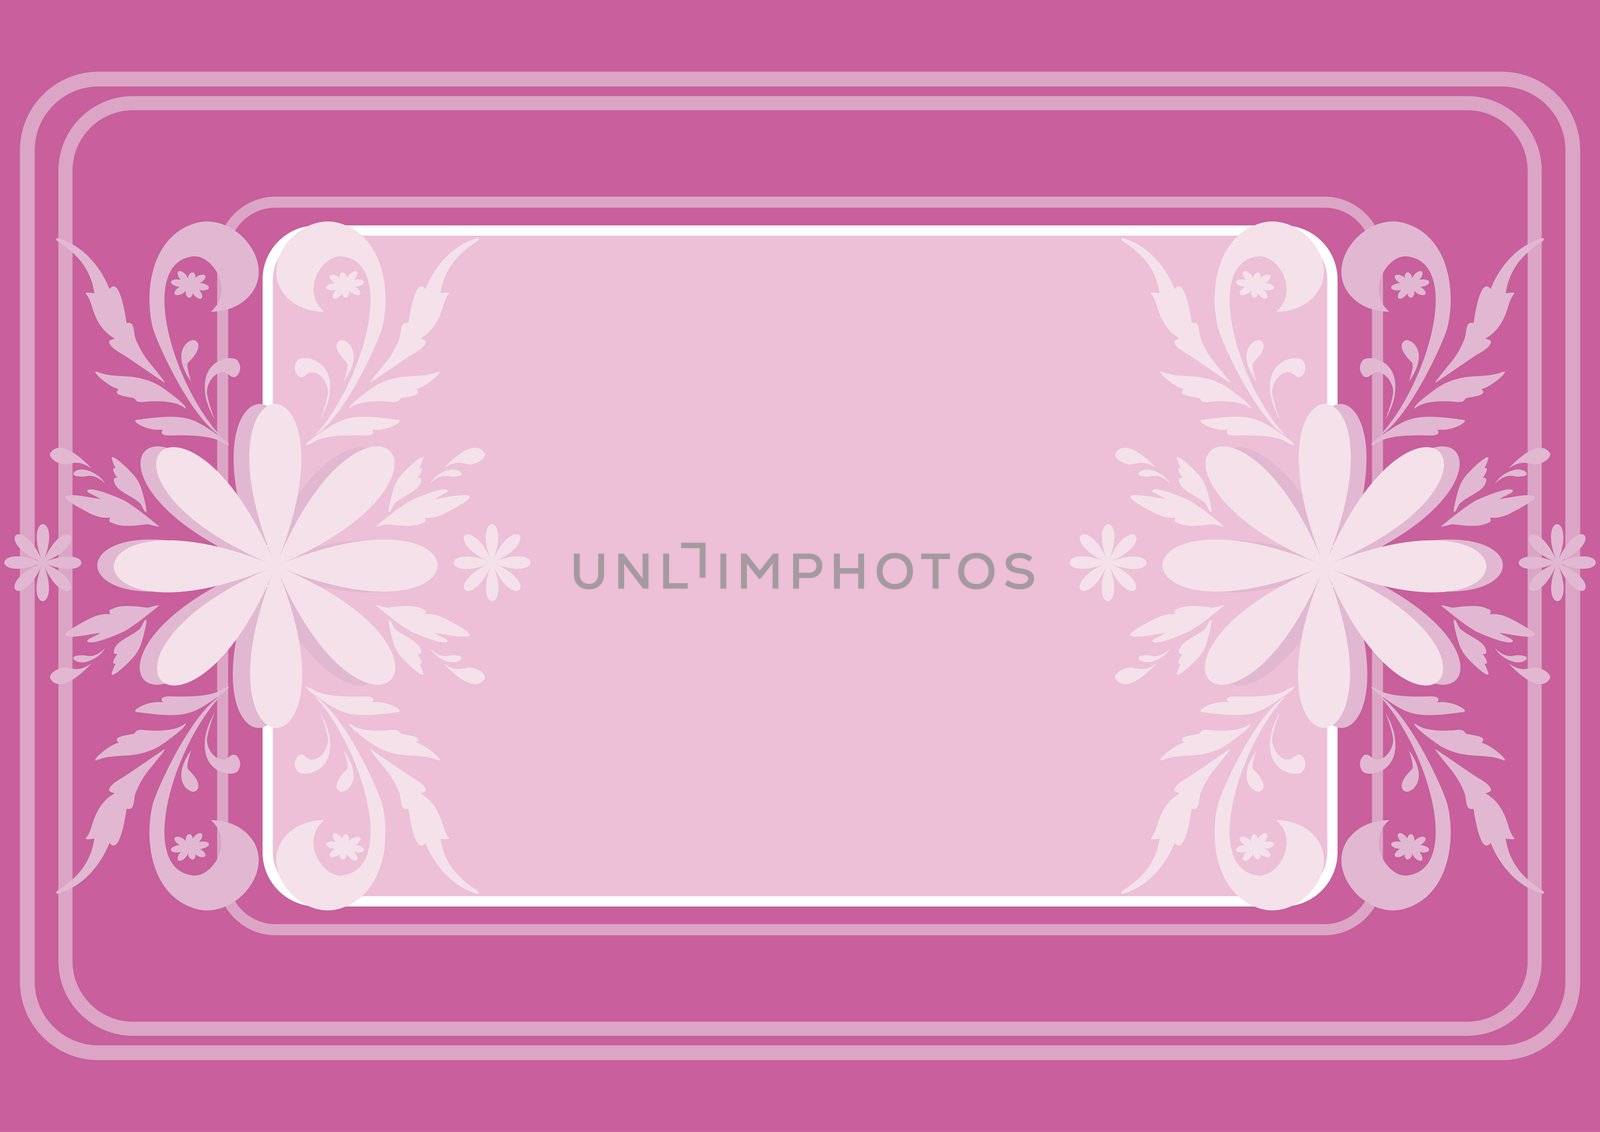 Abstract floral background with flowers silhouettes and frame